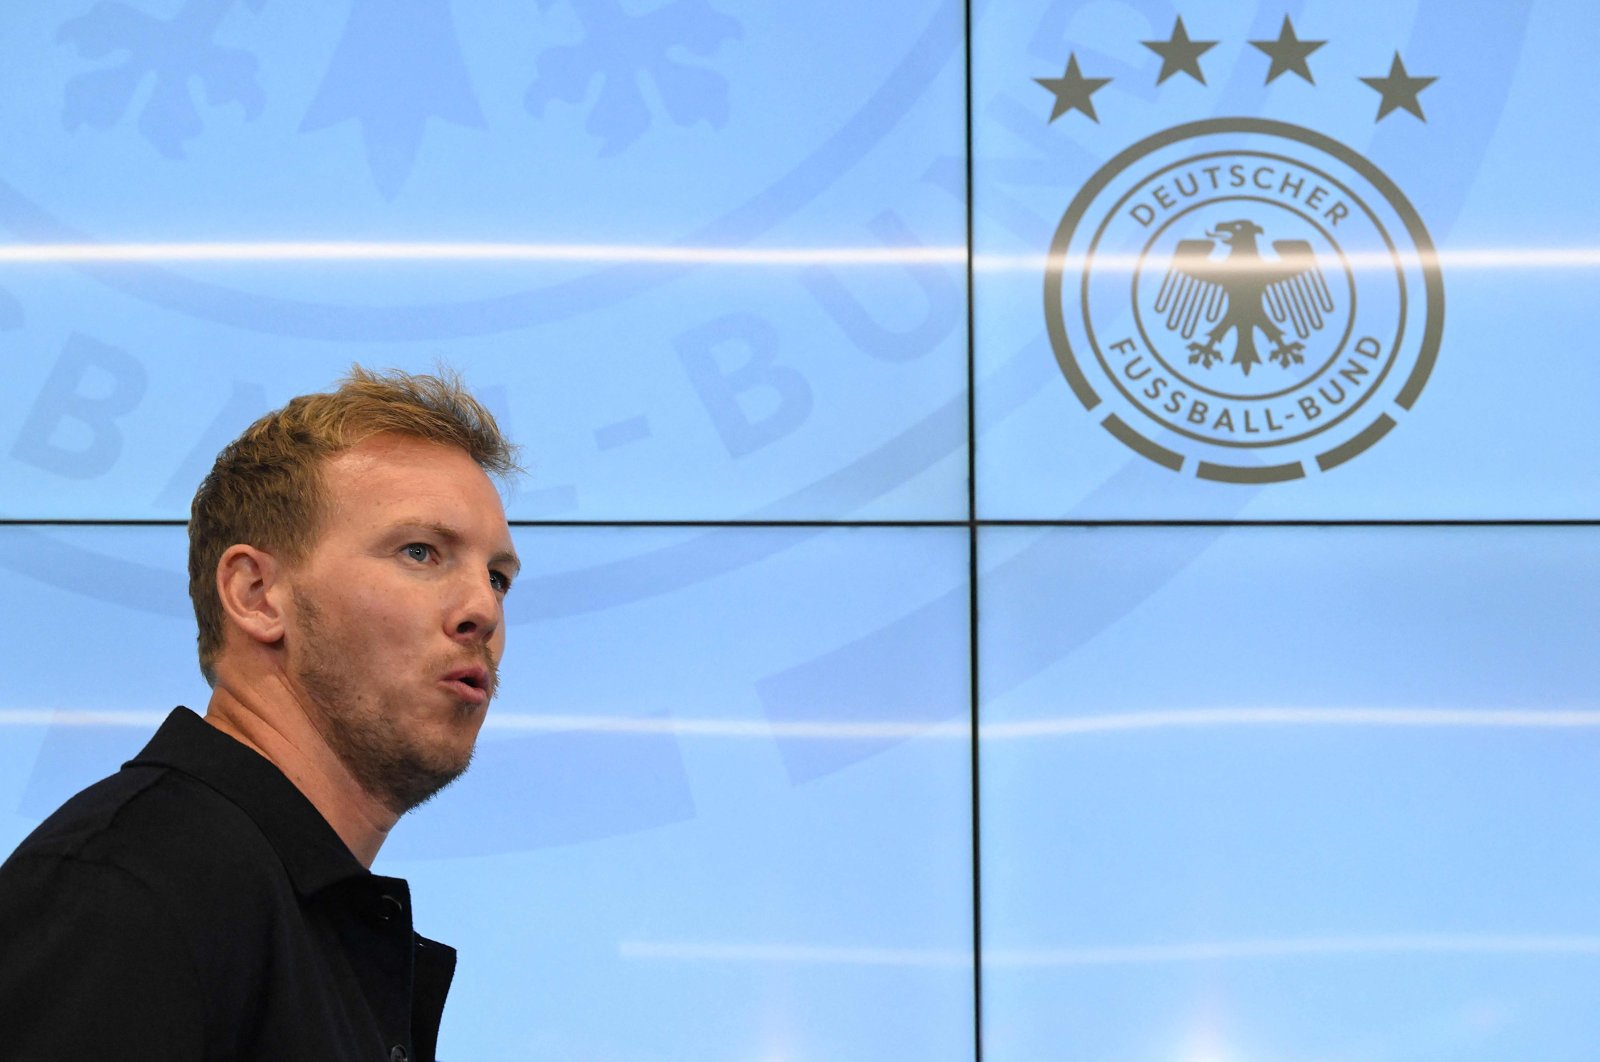 Nagelsmann assumes Germany’s reins ahead of Euro 2024 hosting